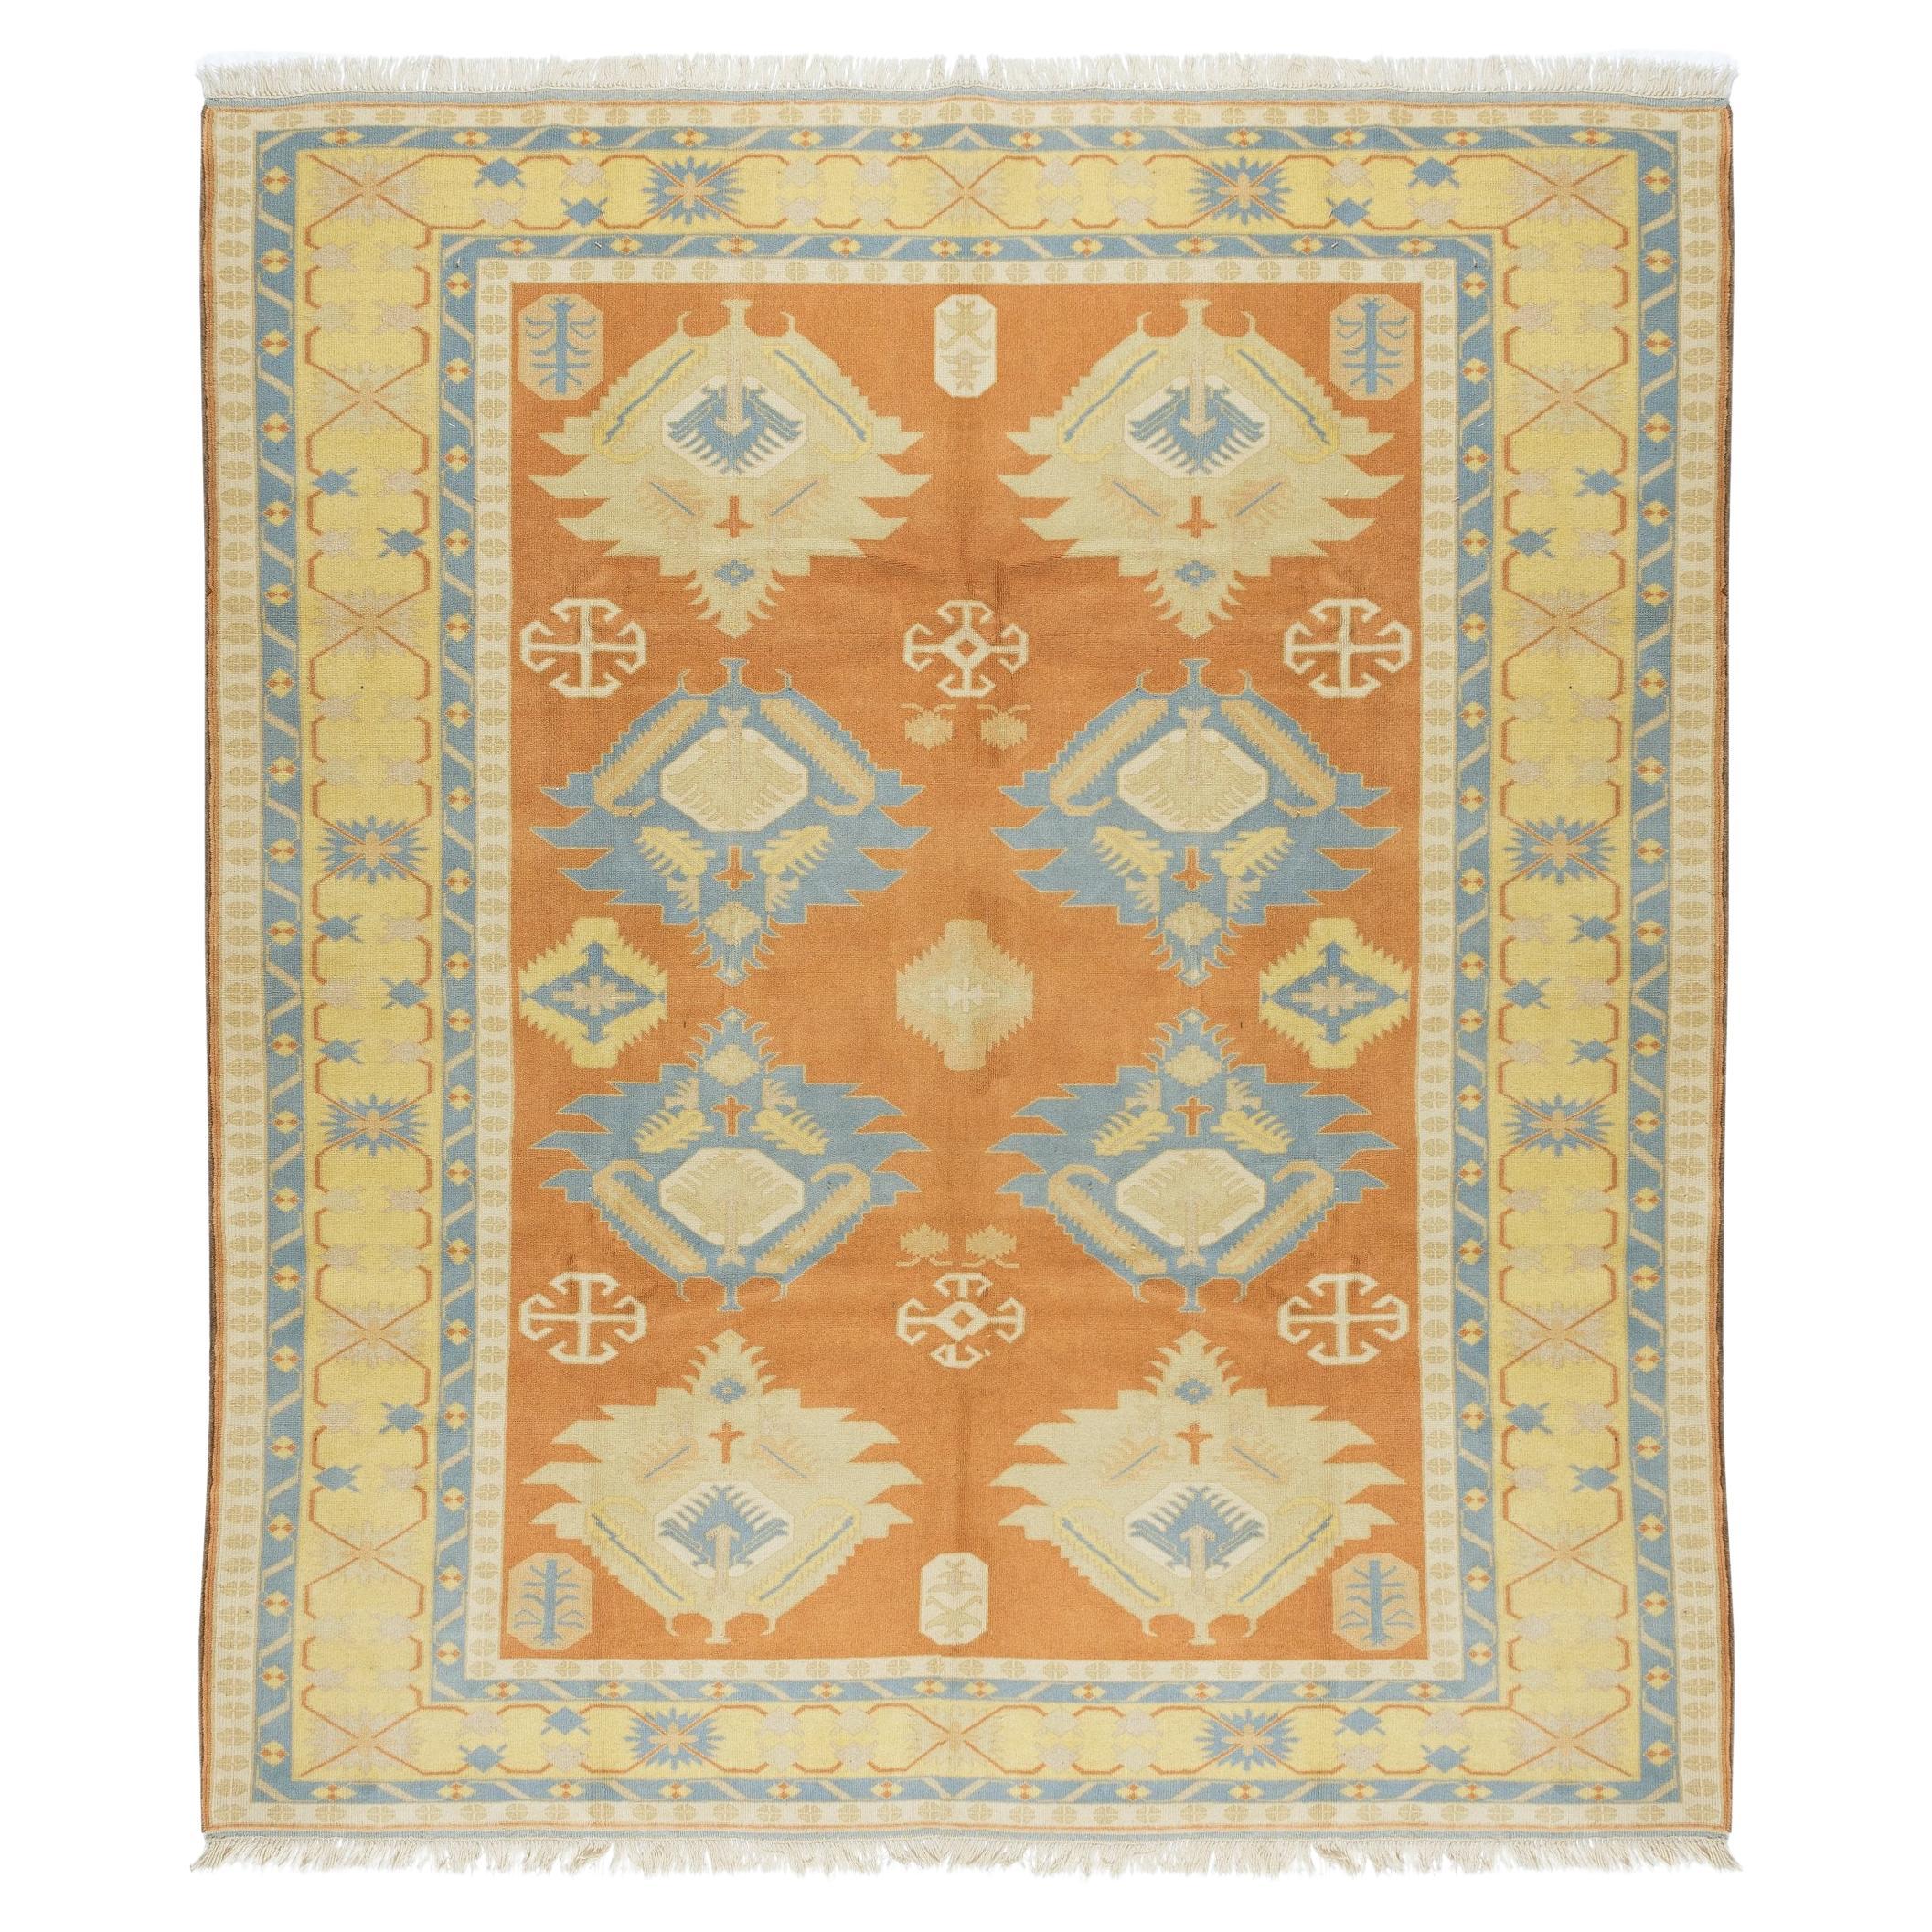 8.4x10 Ft Unique Turkish Geometric Rug, Traditional Vintage Hand Knotted Carpet For Sale